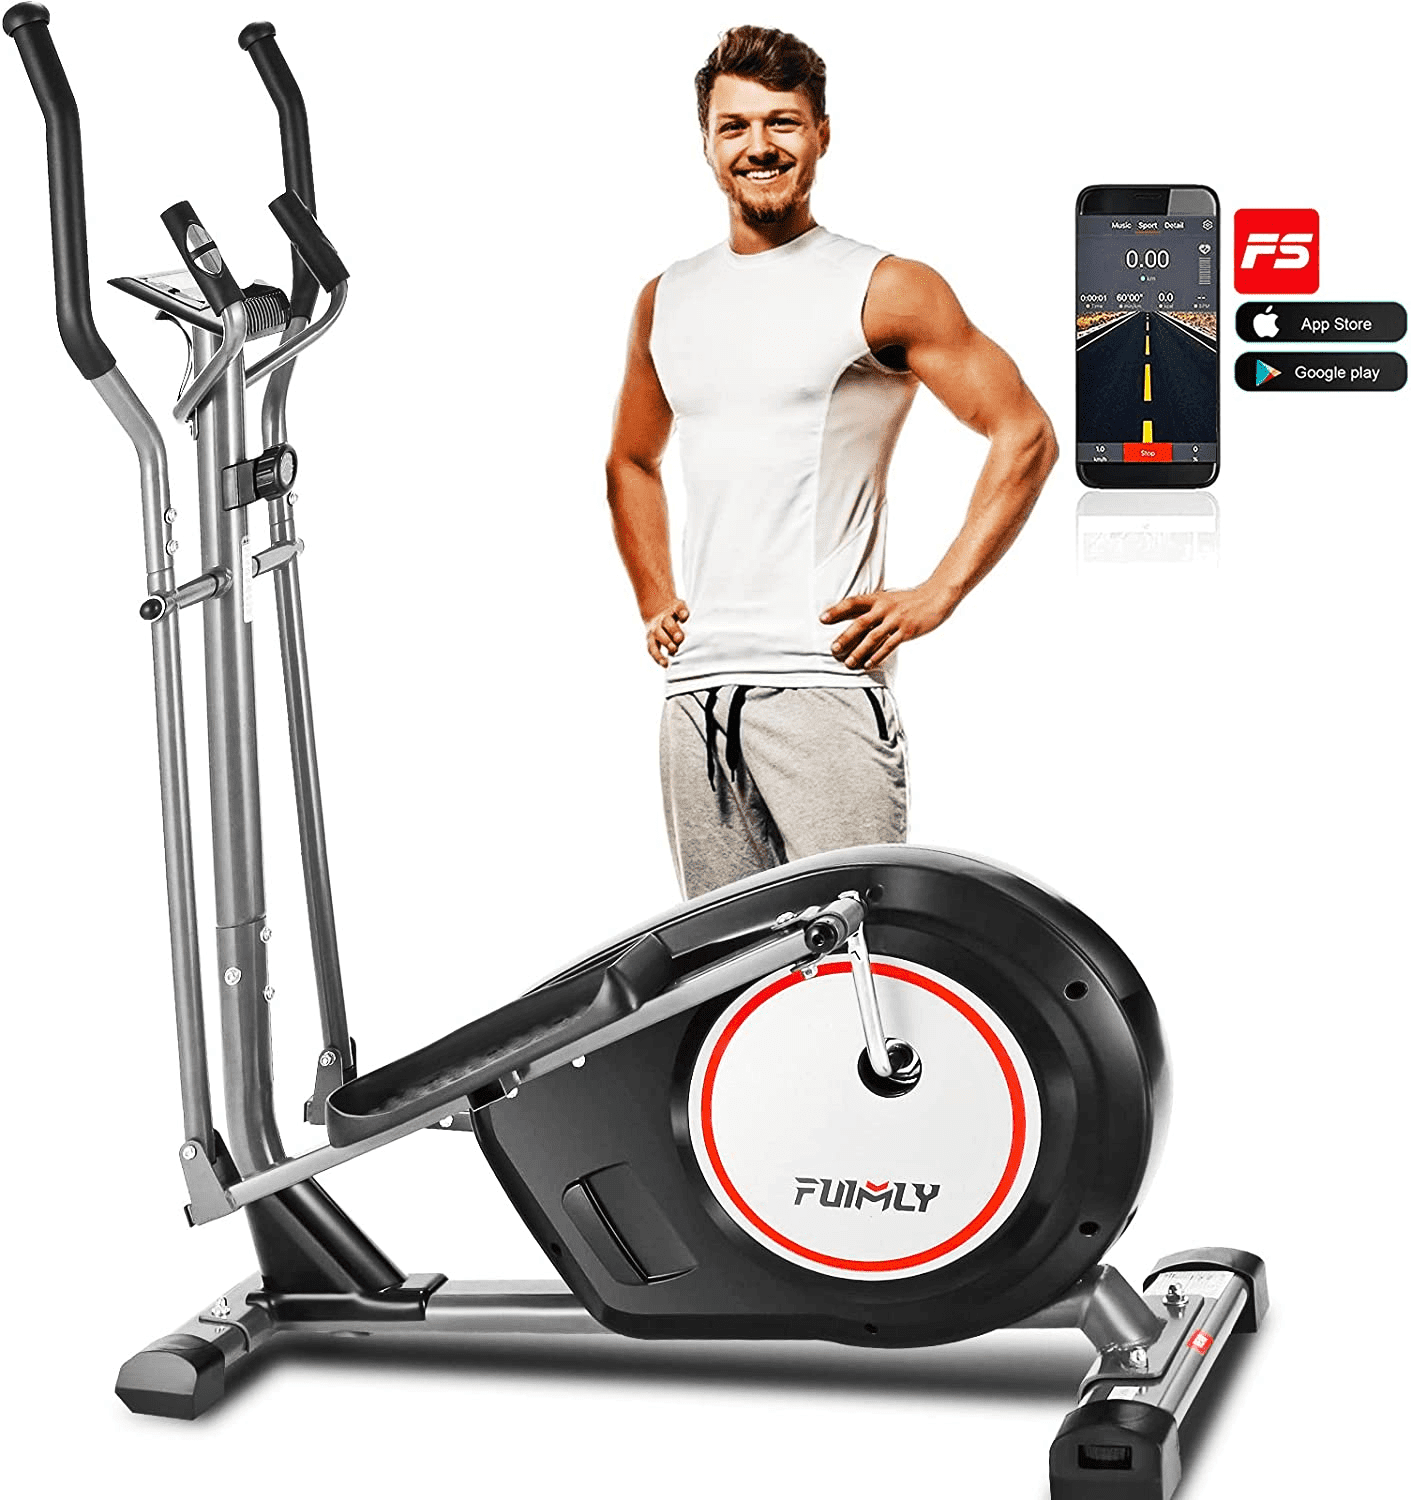 ANCHEER Elliptical Machine YQ-2308 Elliptical Machine Cross Trainer with APP Adjustable 8 Level Magnetic Elliptical with LCD Monitor and Pulse Sensors for Indoor Fitness Gym Workout 